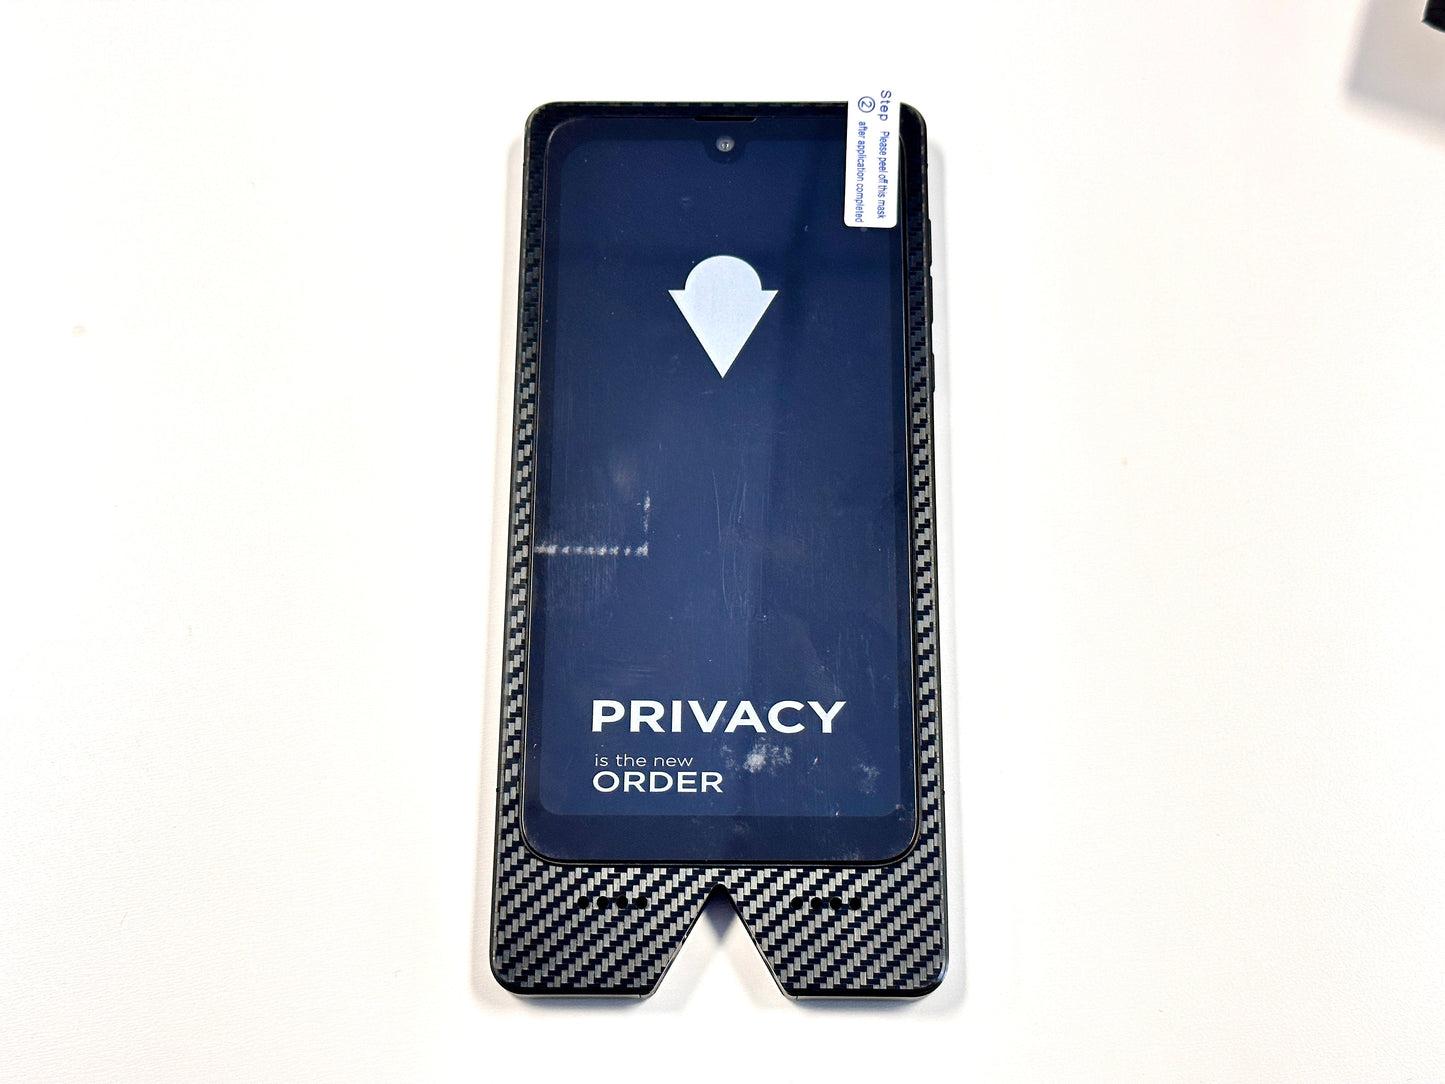 NEW - Impulse K1 Encrypted Privacy Phone ($50 OFF MSRP)